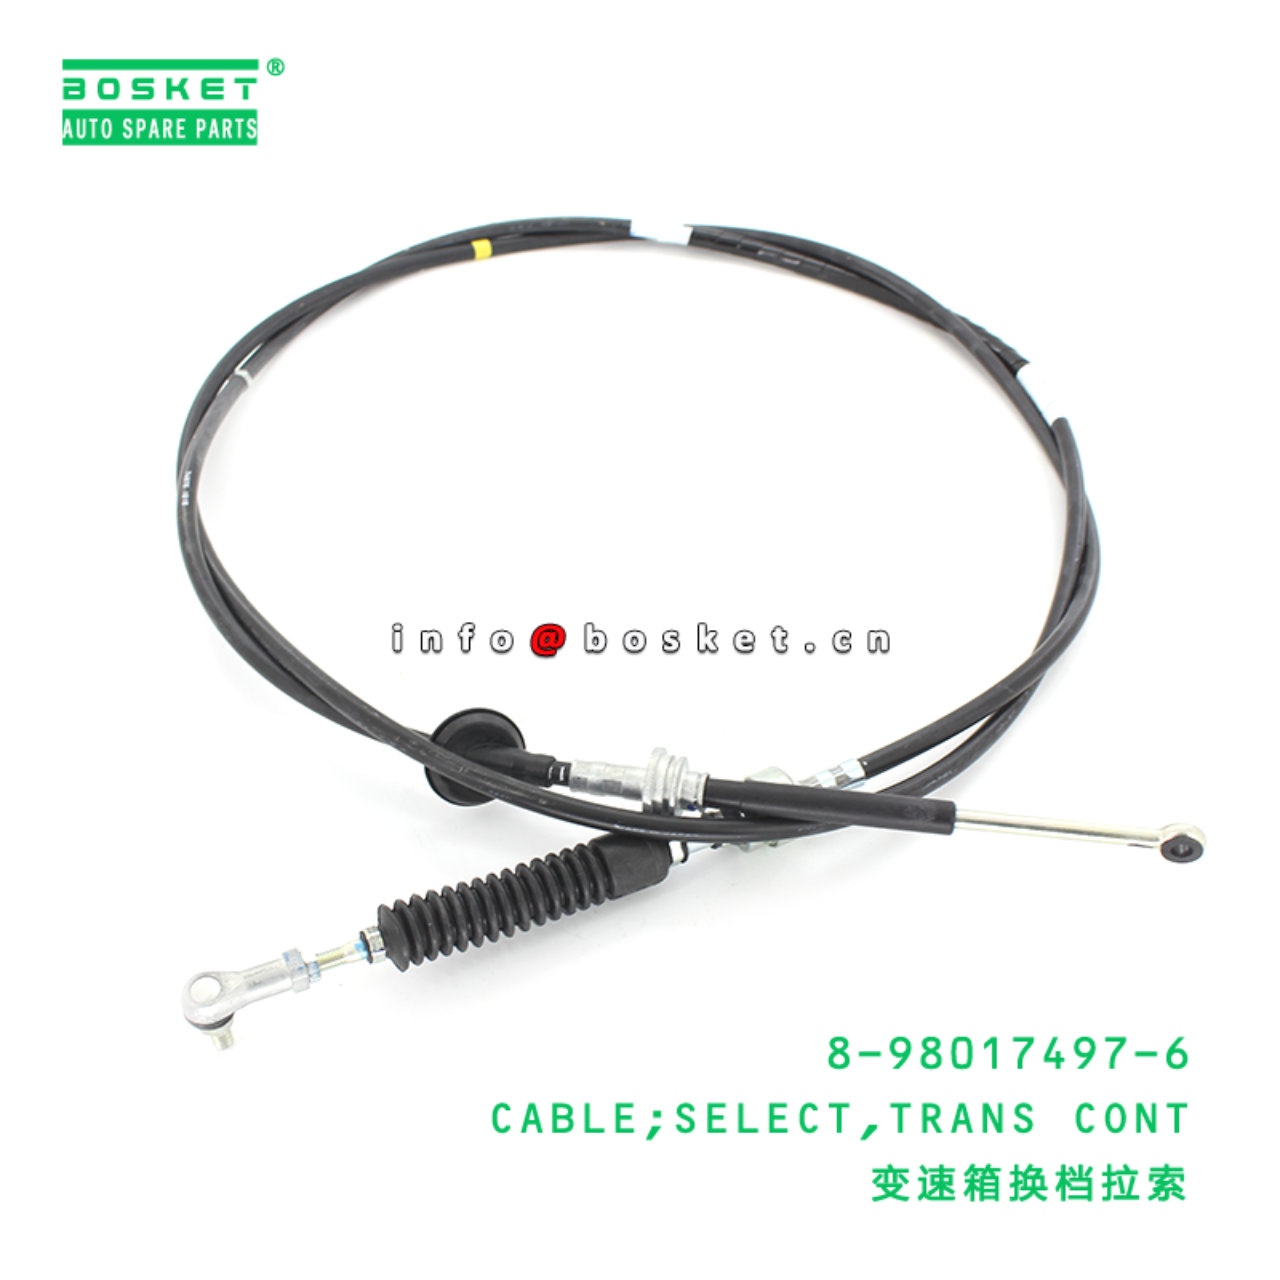 8-98017497-6 Transmission Control Select Cable Suitable for ISUZU FVR 8980174976